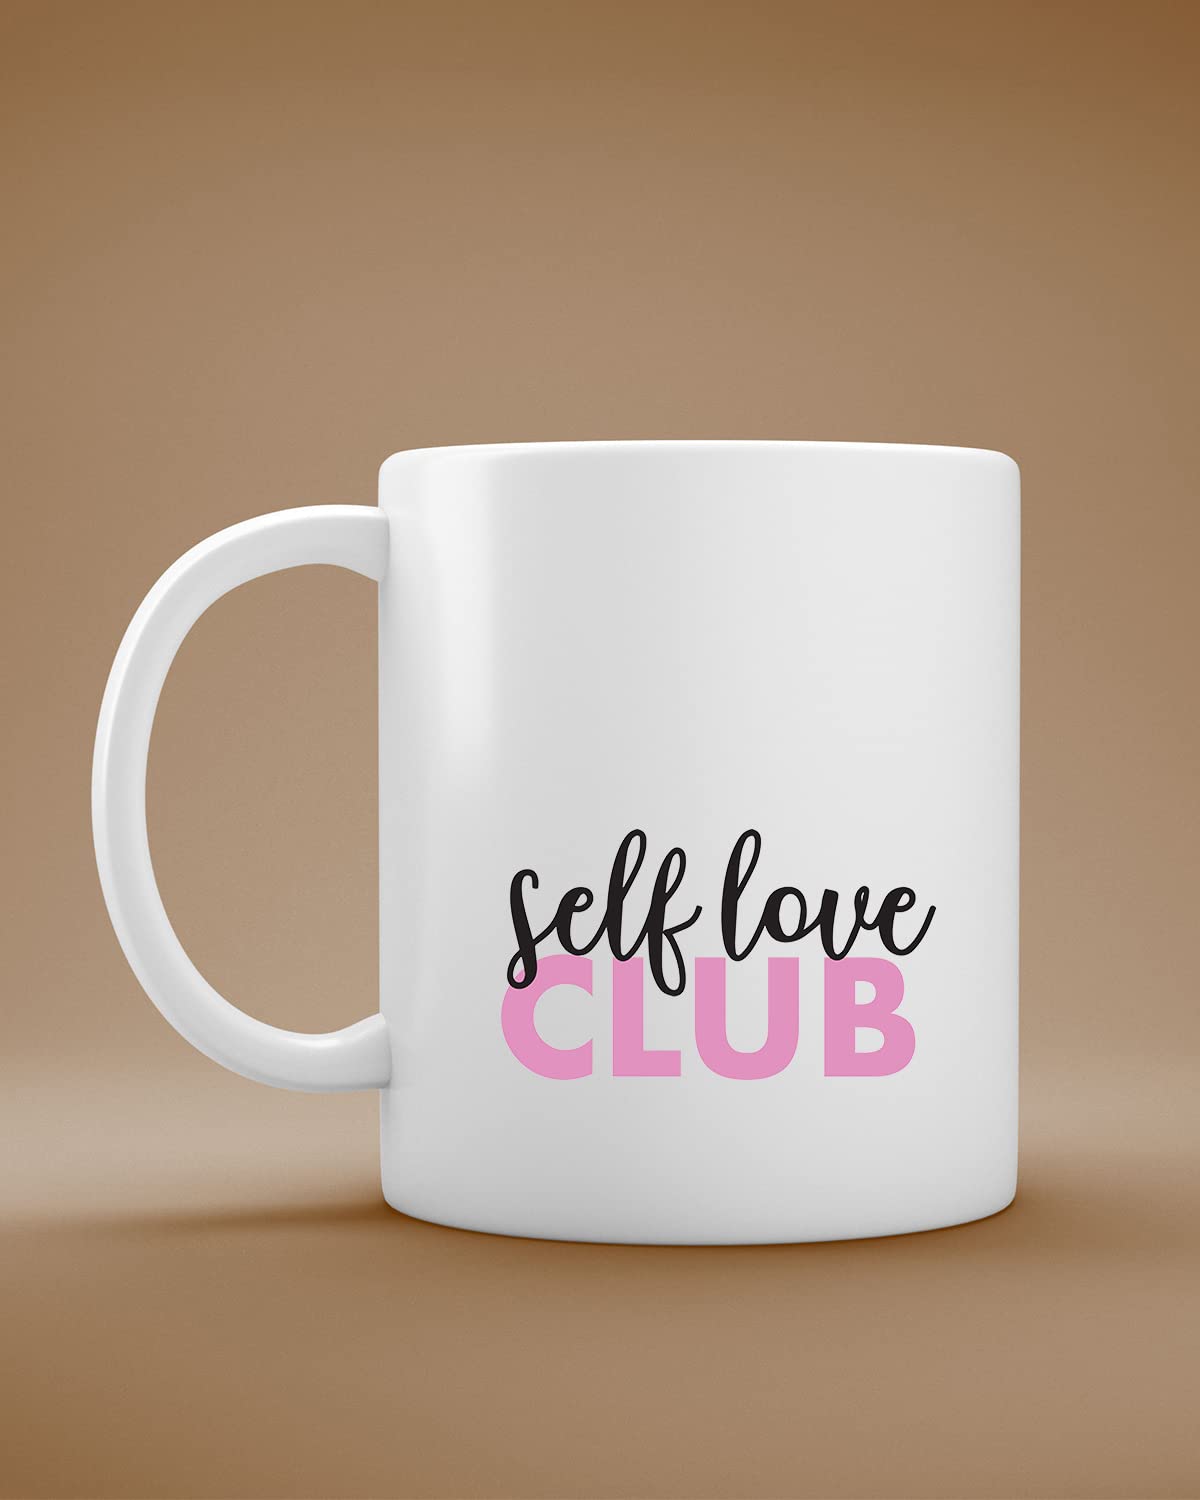 The Pink Magnet Self Love Club Coffee Mug | Romantic Printed for Birthday,Anniversary Gift,Valentine's Day Gift, for Someone Special Inspirational thoughts gifts for boyfriend | inspiring quotes Printed coffee mug(Ceramic) | coffee mug